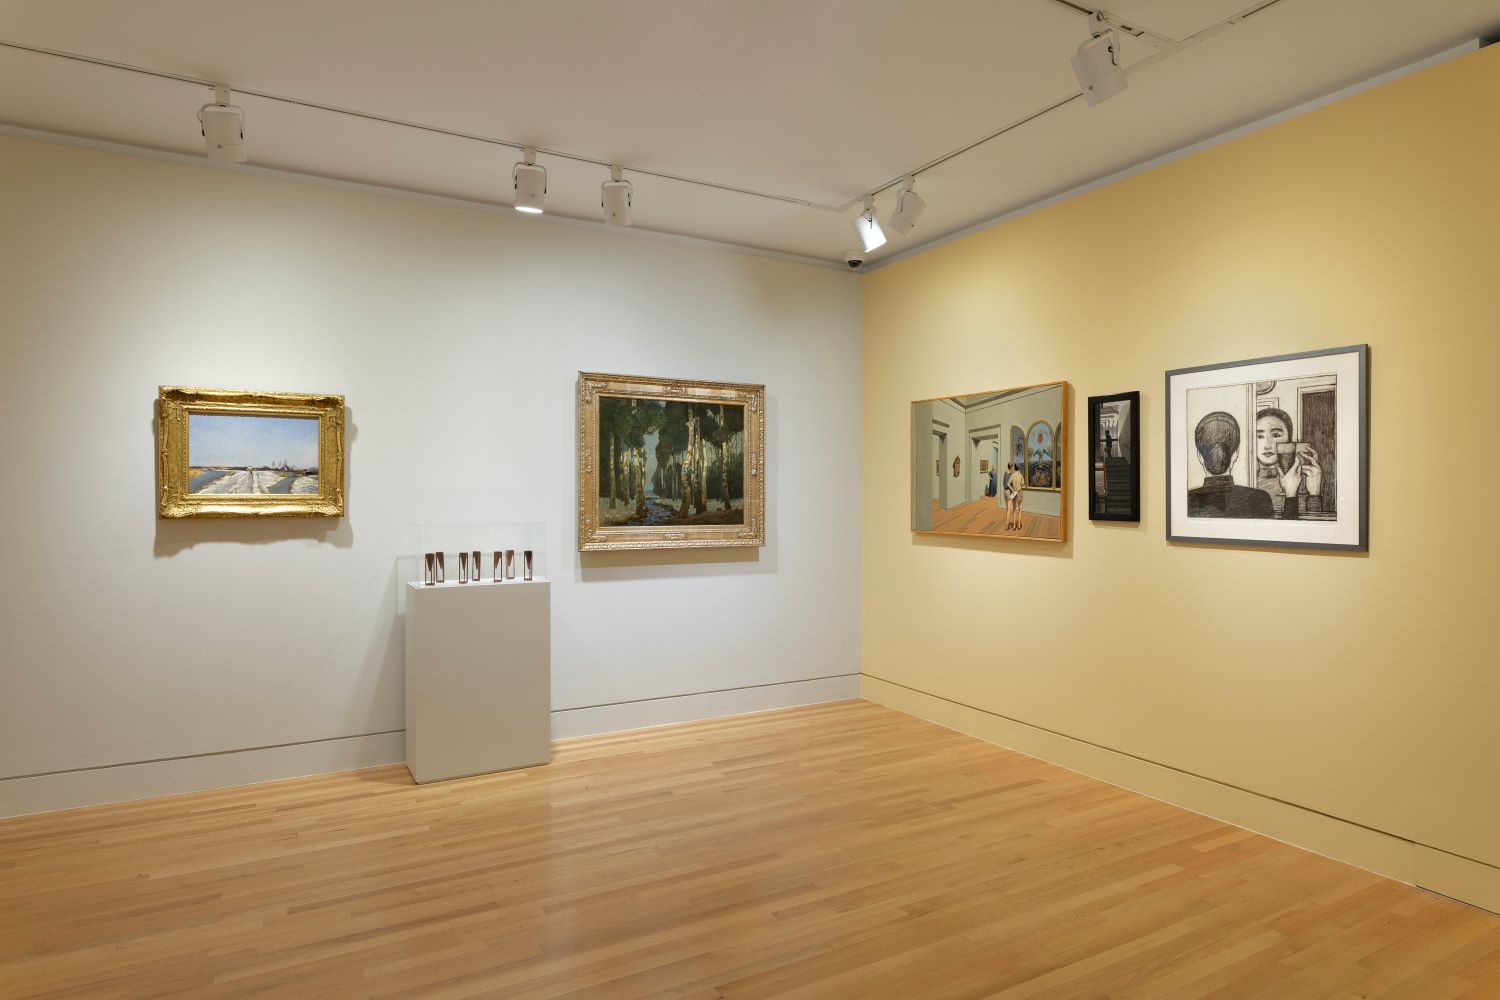 Photograph of a museum gallery with four paintings, one sculpture, and one drawing